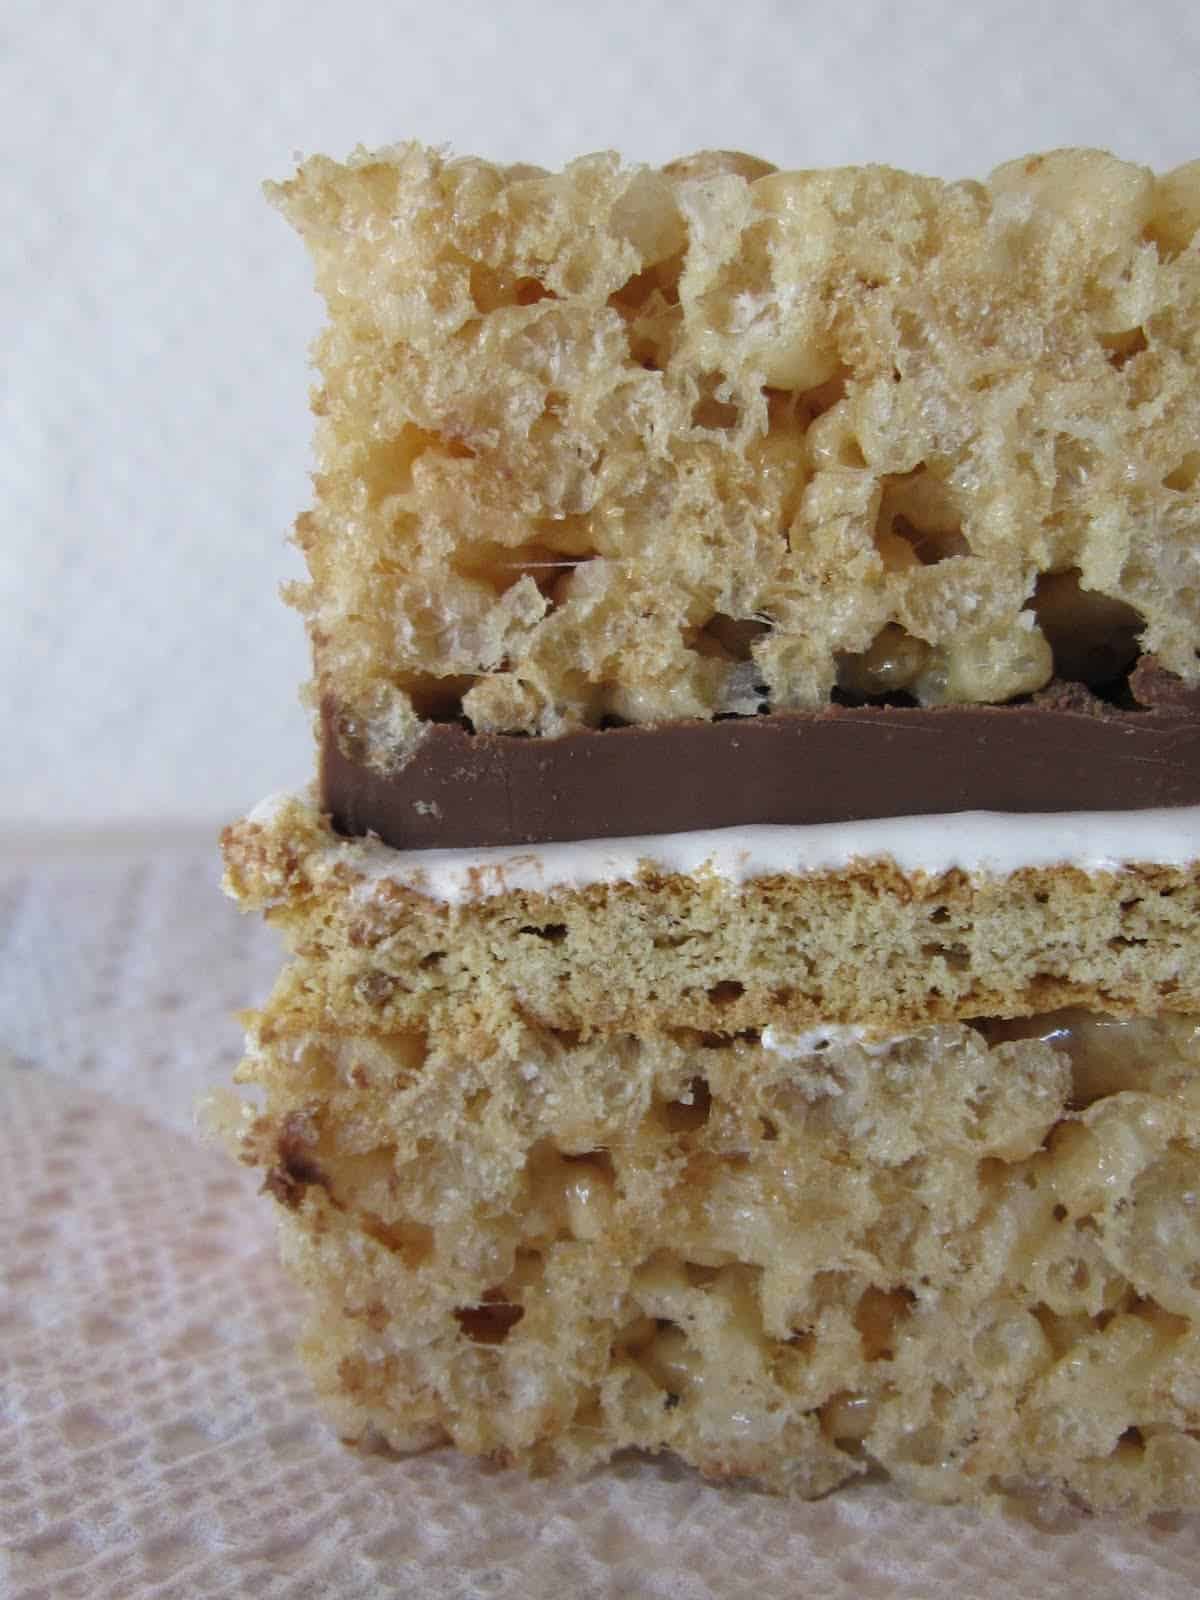 Side view of a S'Mores Krispie Treat with chocolate and marshmallow in the middle